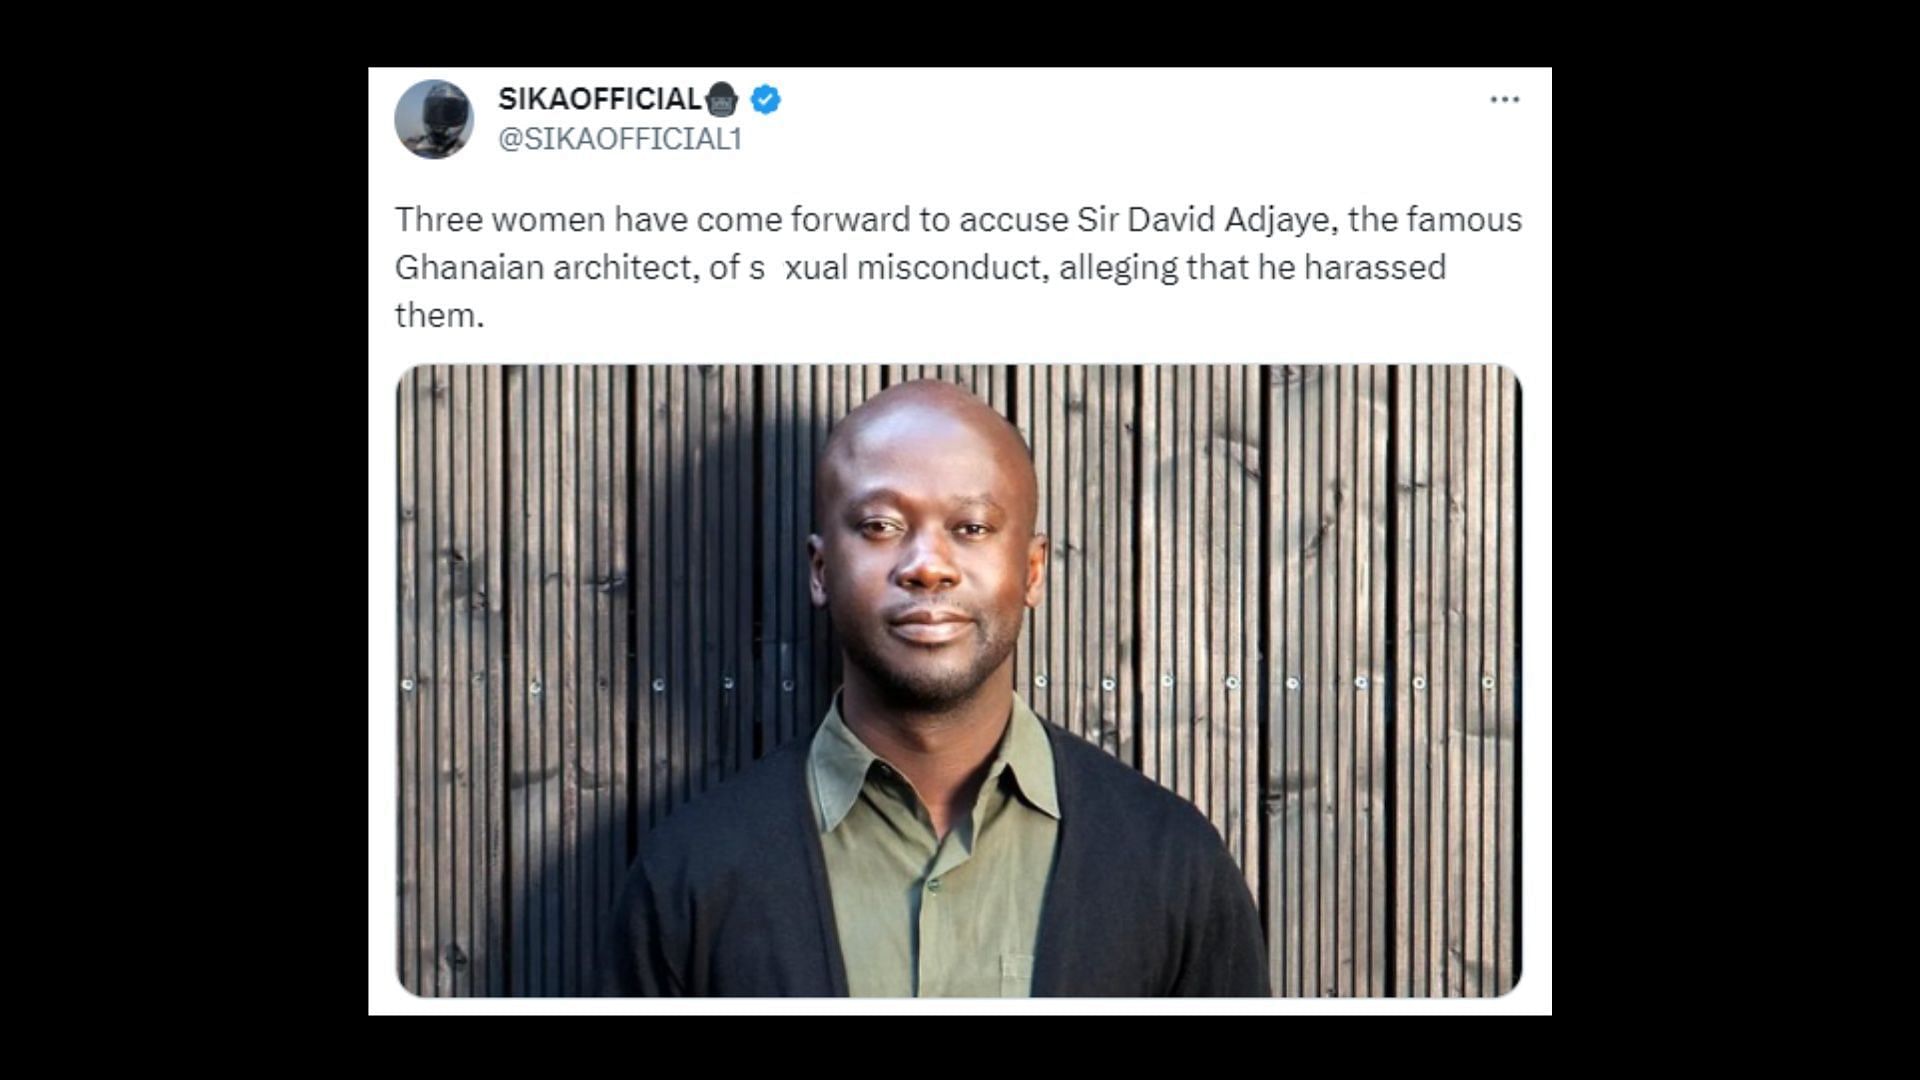 David Adjaye was charged with s*xual assault and harassment (Image via SIKAOFFICIAL1/Twitter)